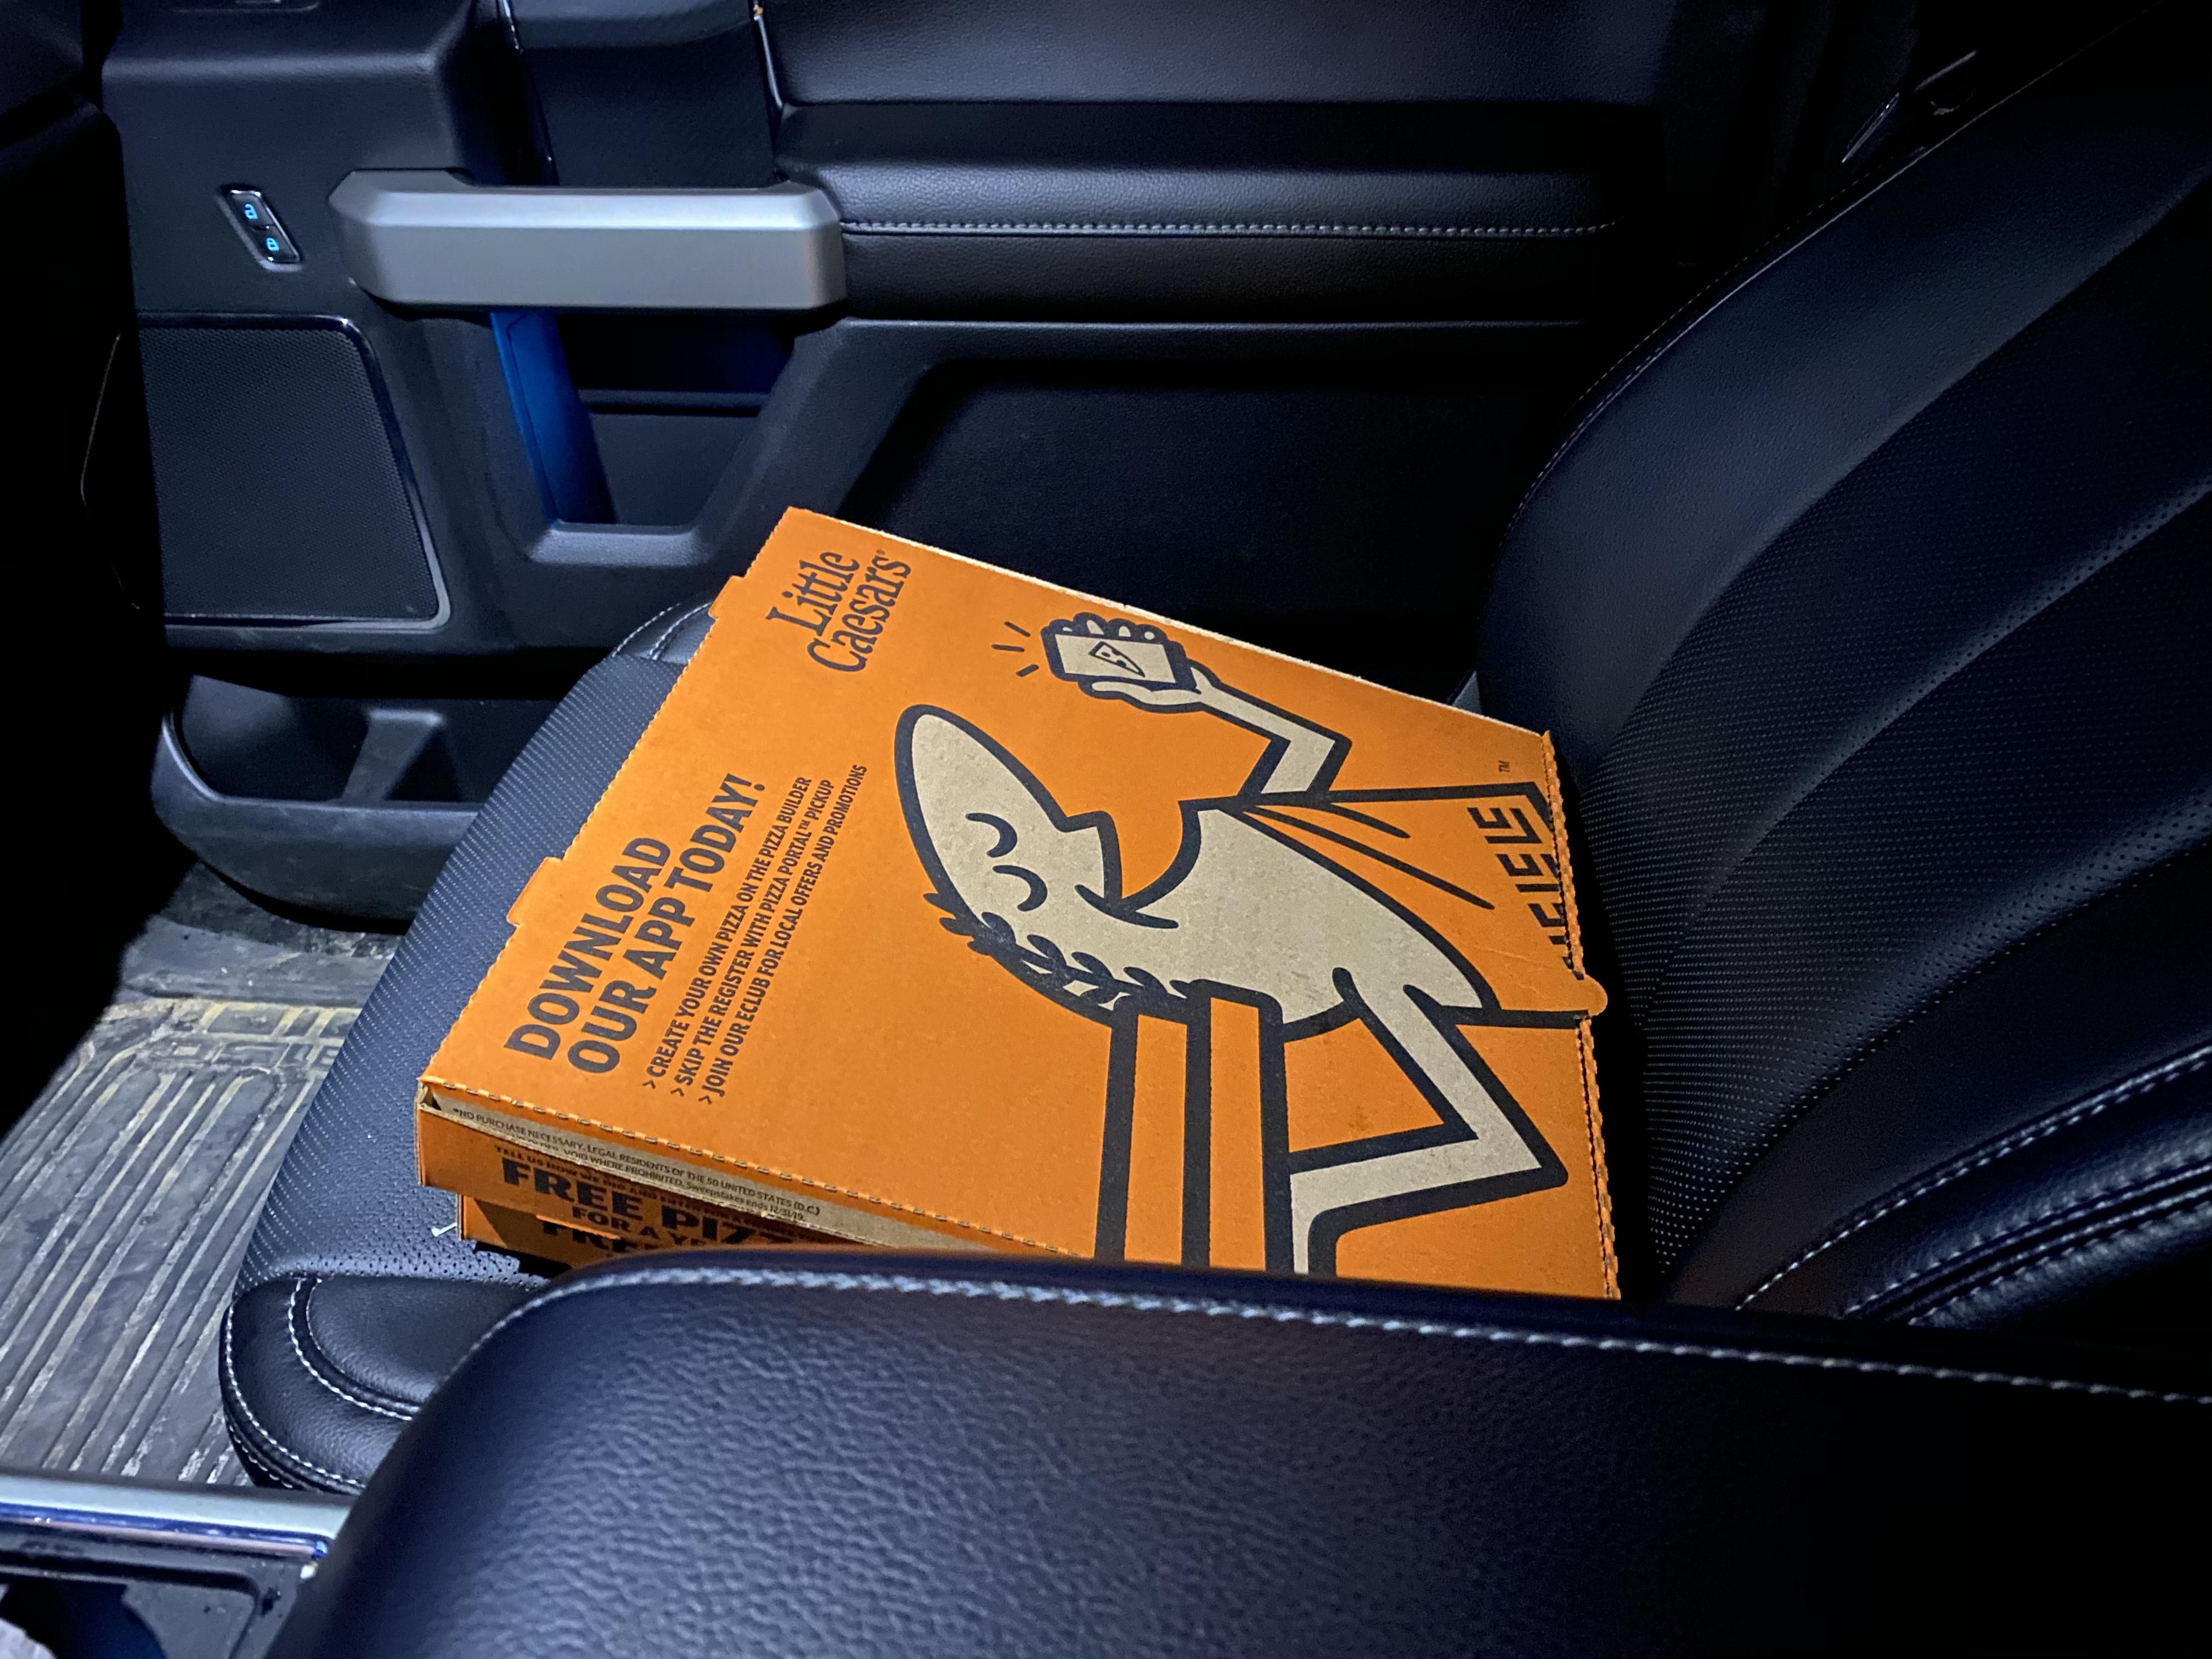 Heated seats? You mean pizza warmers?